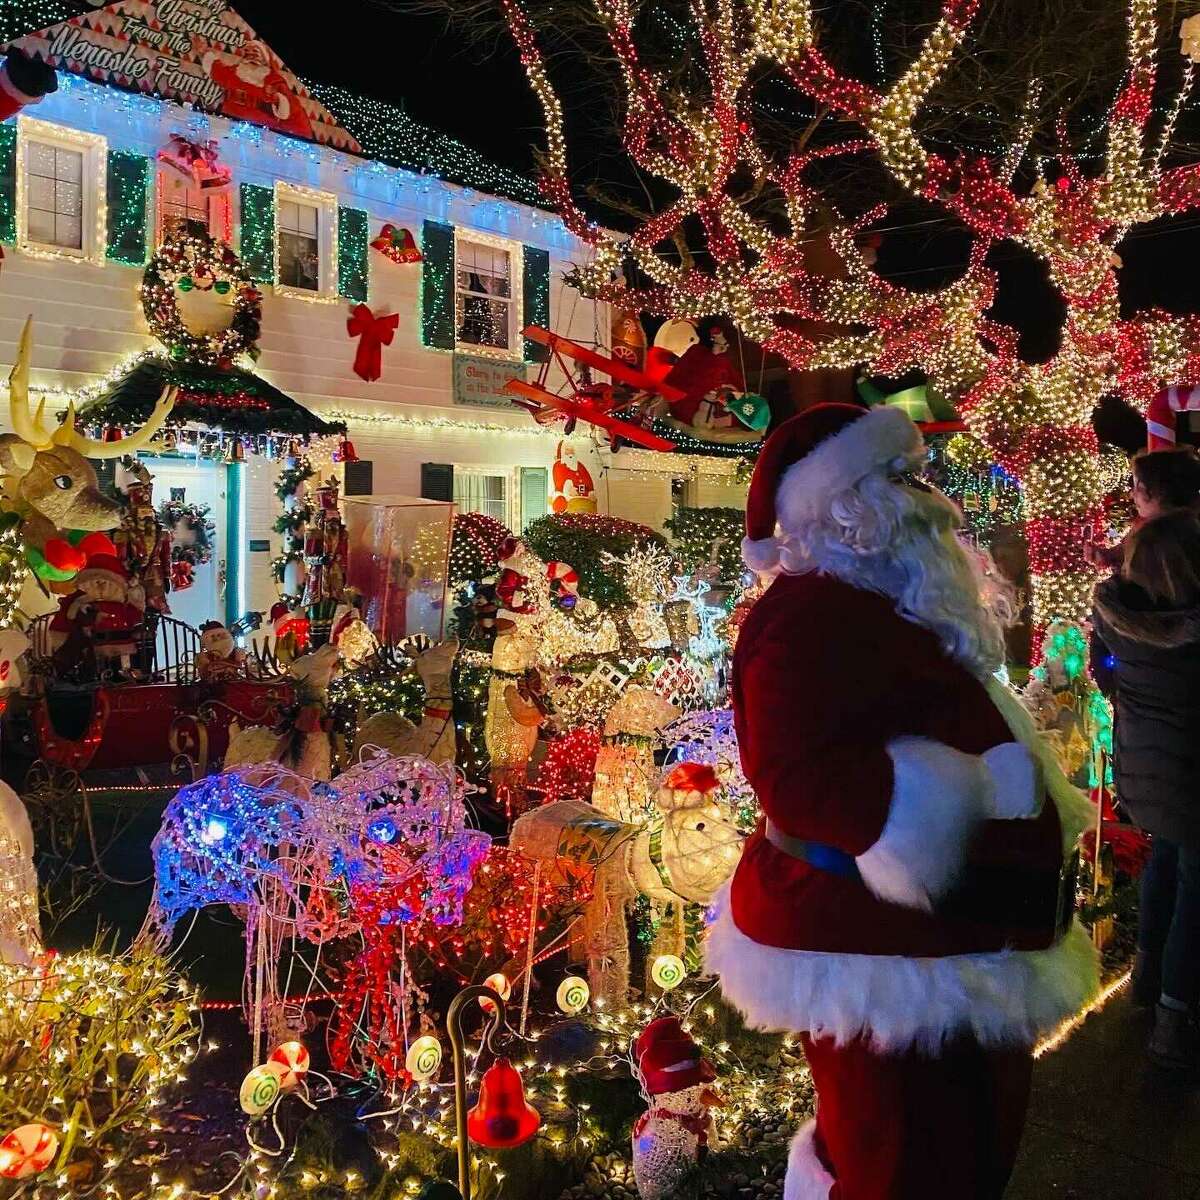 The Menashe family typically displays a gargantuan festive lighting at their home in West Seattle. Their display typically runs 5 p.m.-11 p.m. from the Sunday after Thanksgiving through January 1 at the 5600 block of Beach Drive. The Gai Family house also tends to host a large display at the 3200 block of 36th S.W.